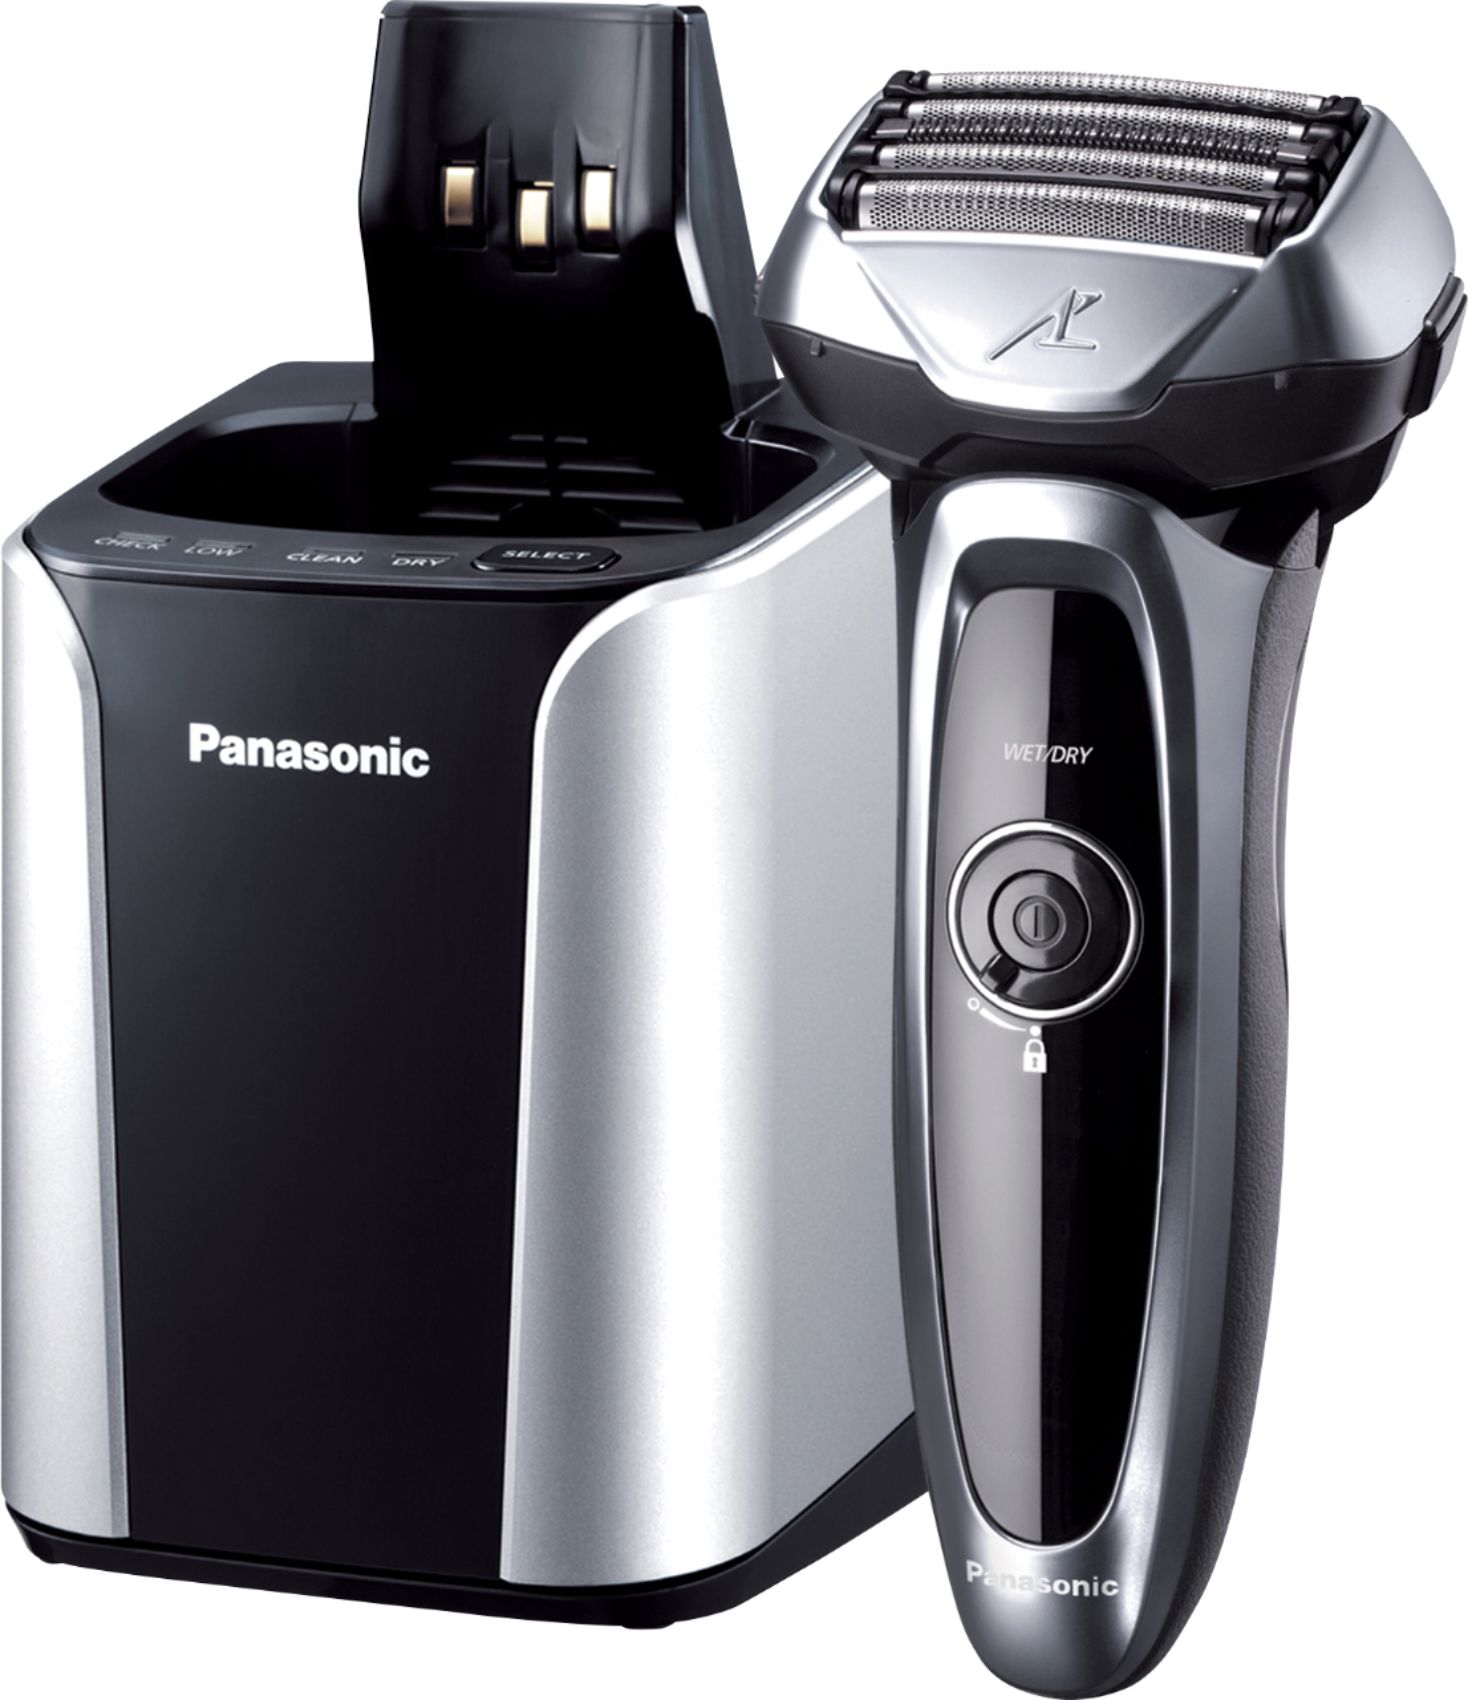 Angle View: Panasonic ARC5 Men's Shaver with Premium Cleaning & Charge System, 5-Blade Men's Electric Razor with Shave Sensor Technology, Pop-up Trimmer, Wet/Dry - ES-LV95-S